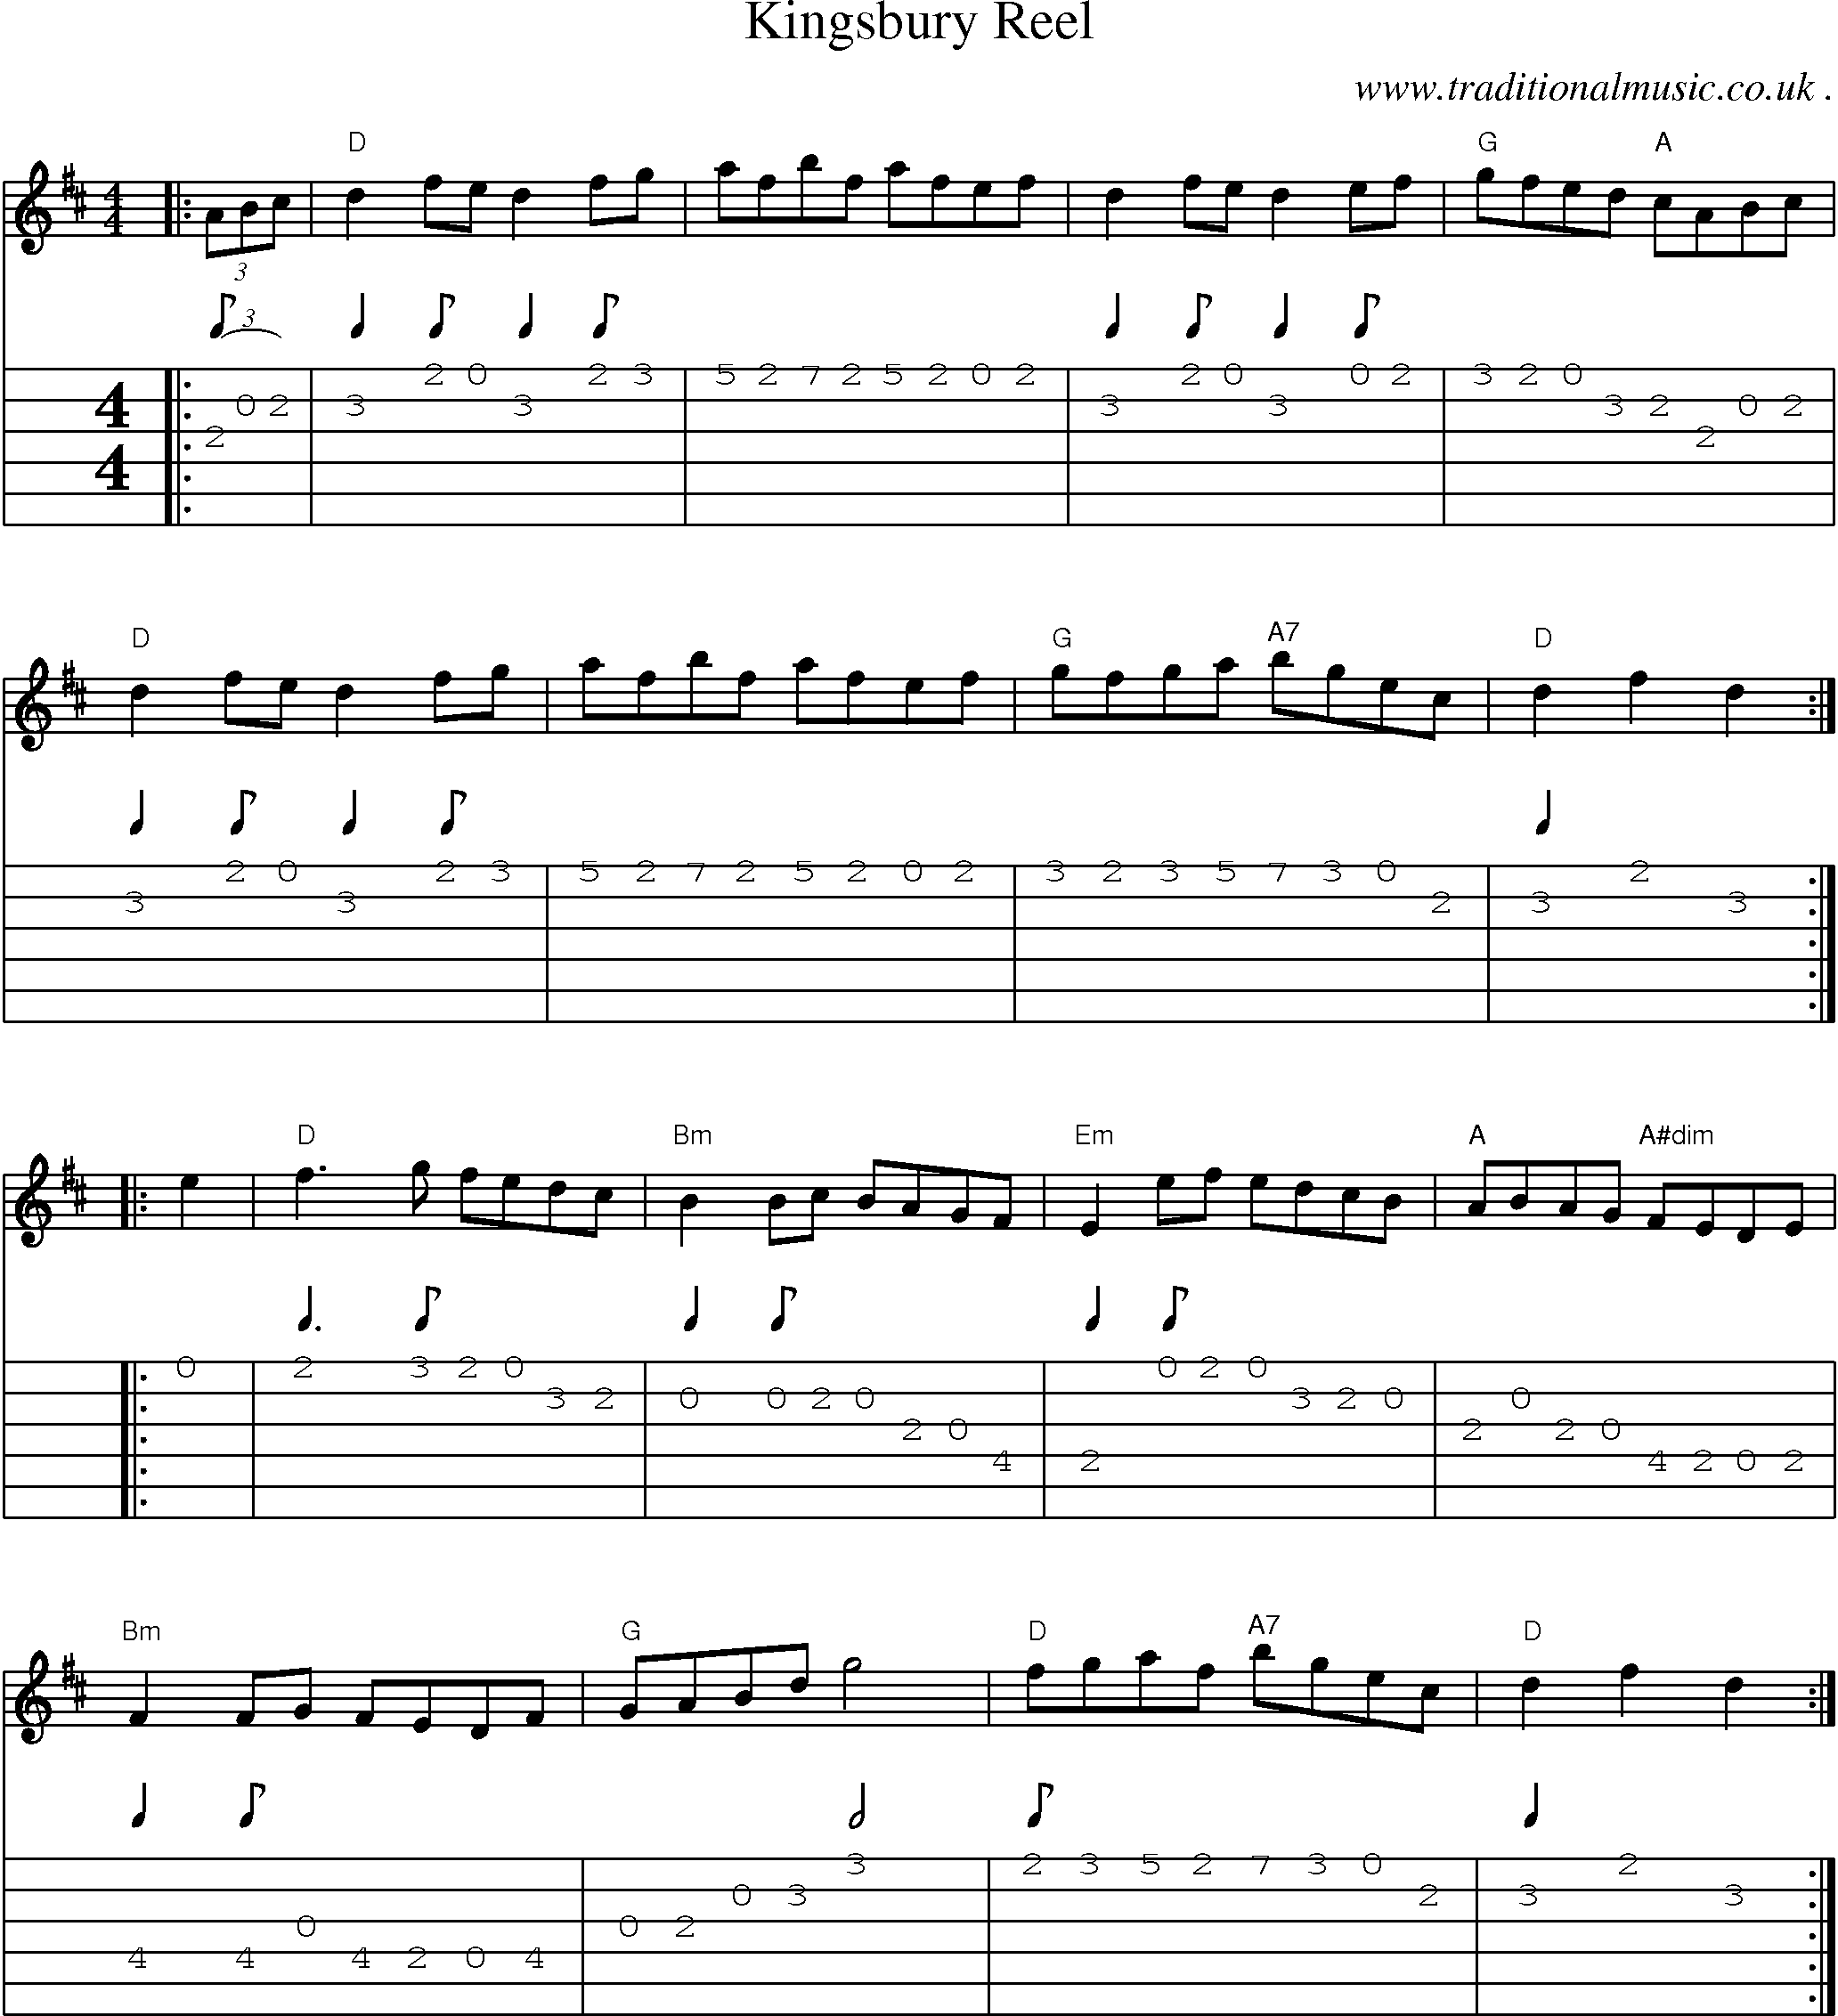 Music Score and Guitar Tabs for Kingsbury Reel